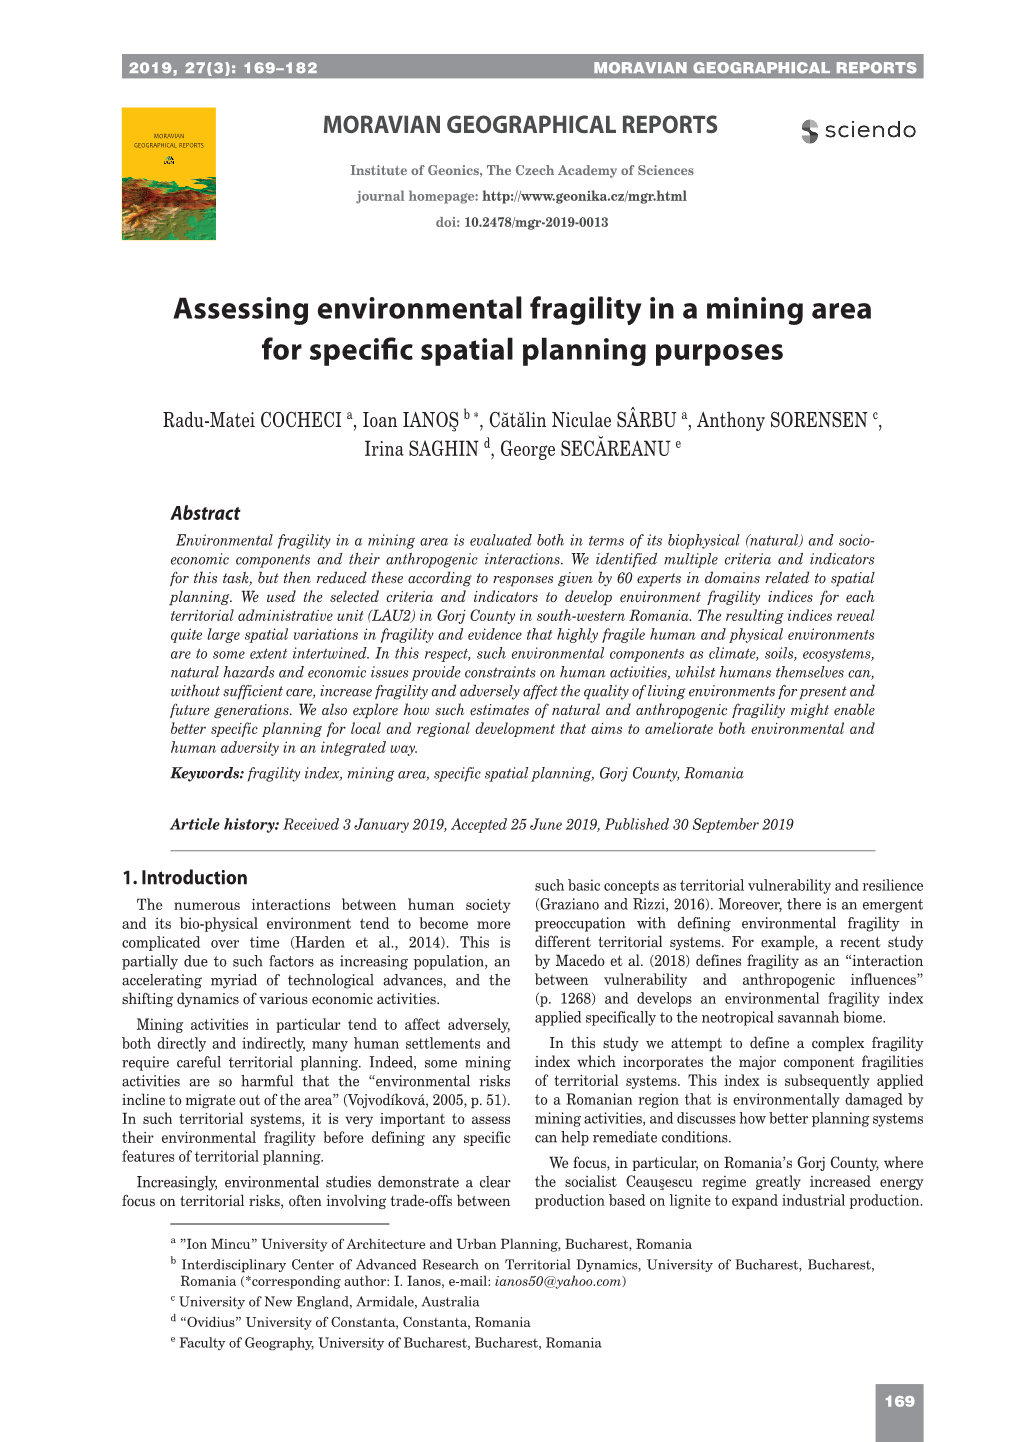 Assessing Environmental Fragility in a Mining Area for Specific Spatial Planning Purposes